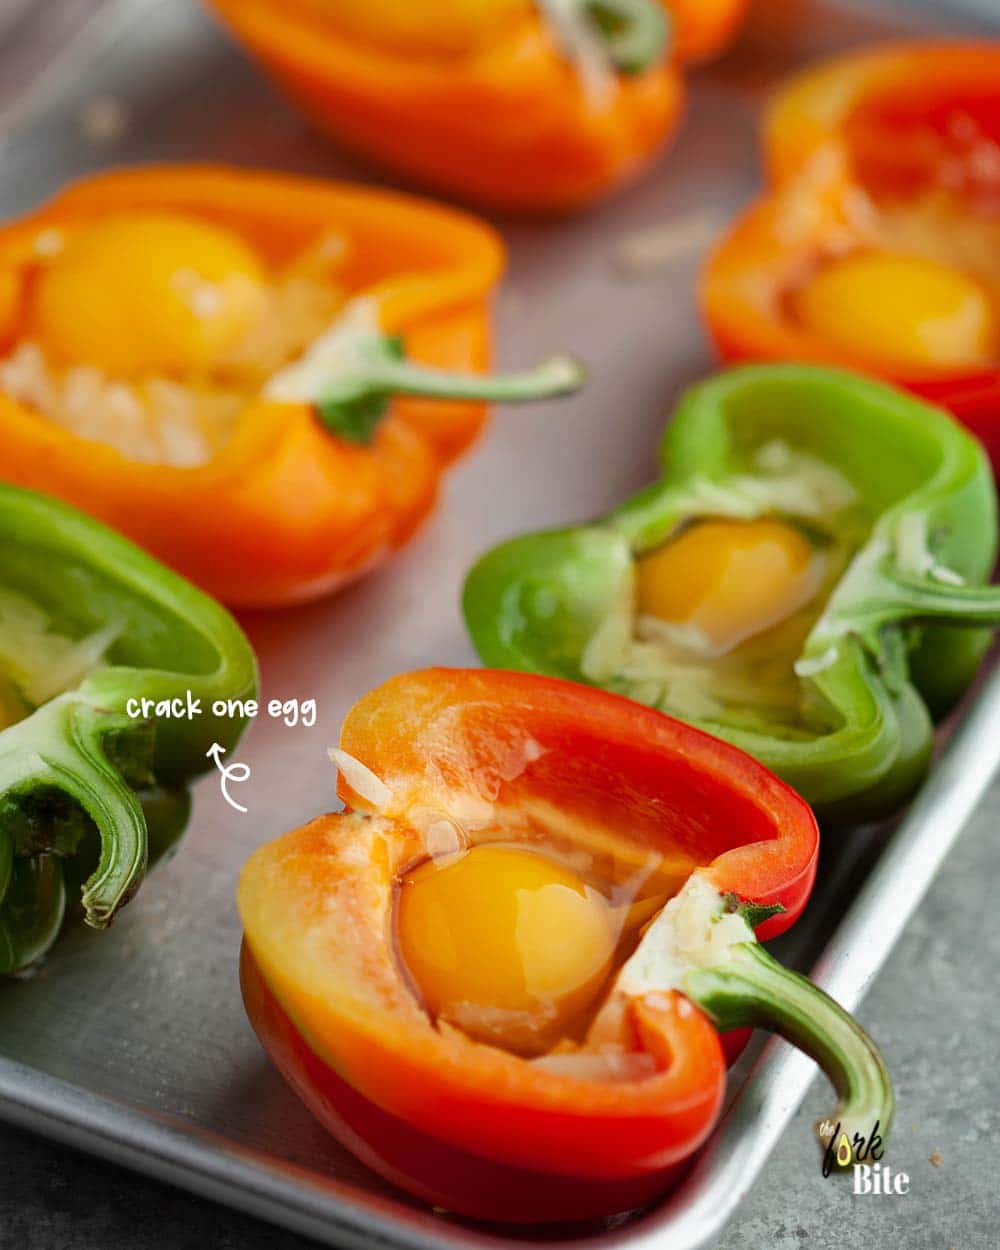 Once the  bell peppers are ready, take them out from the oven and crack an egg into each one.